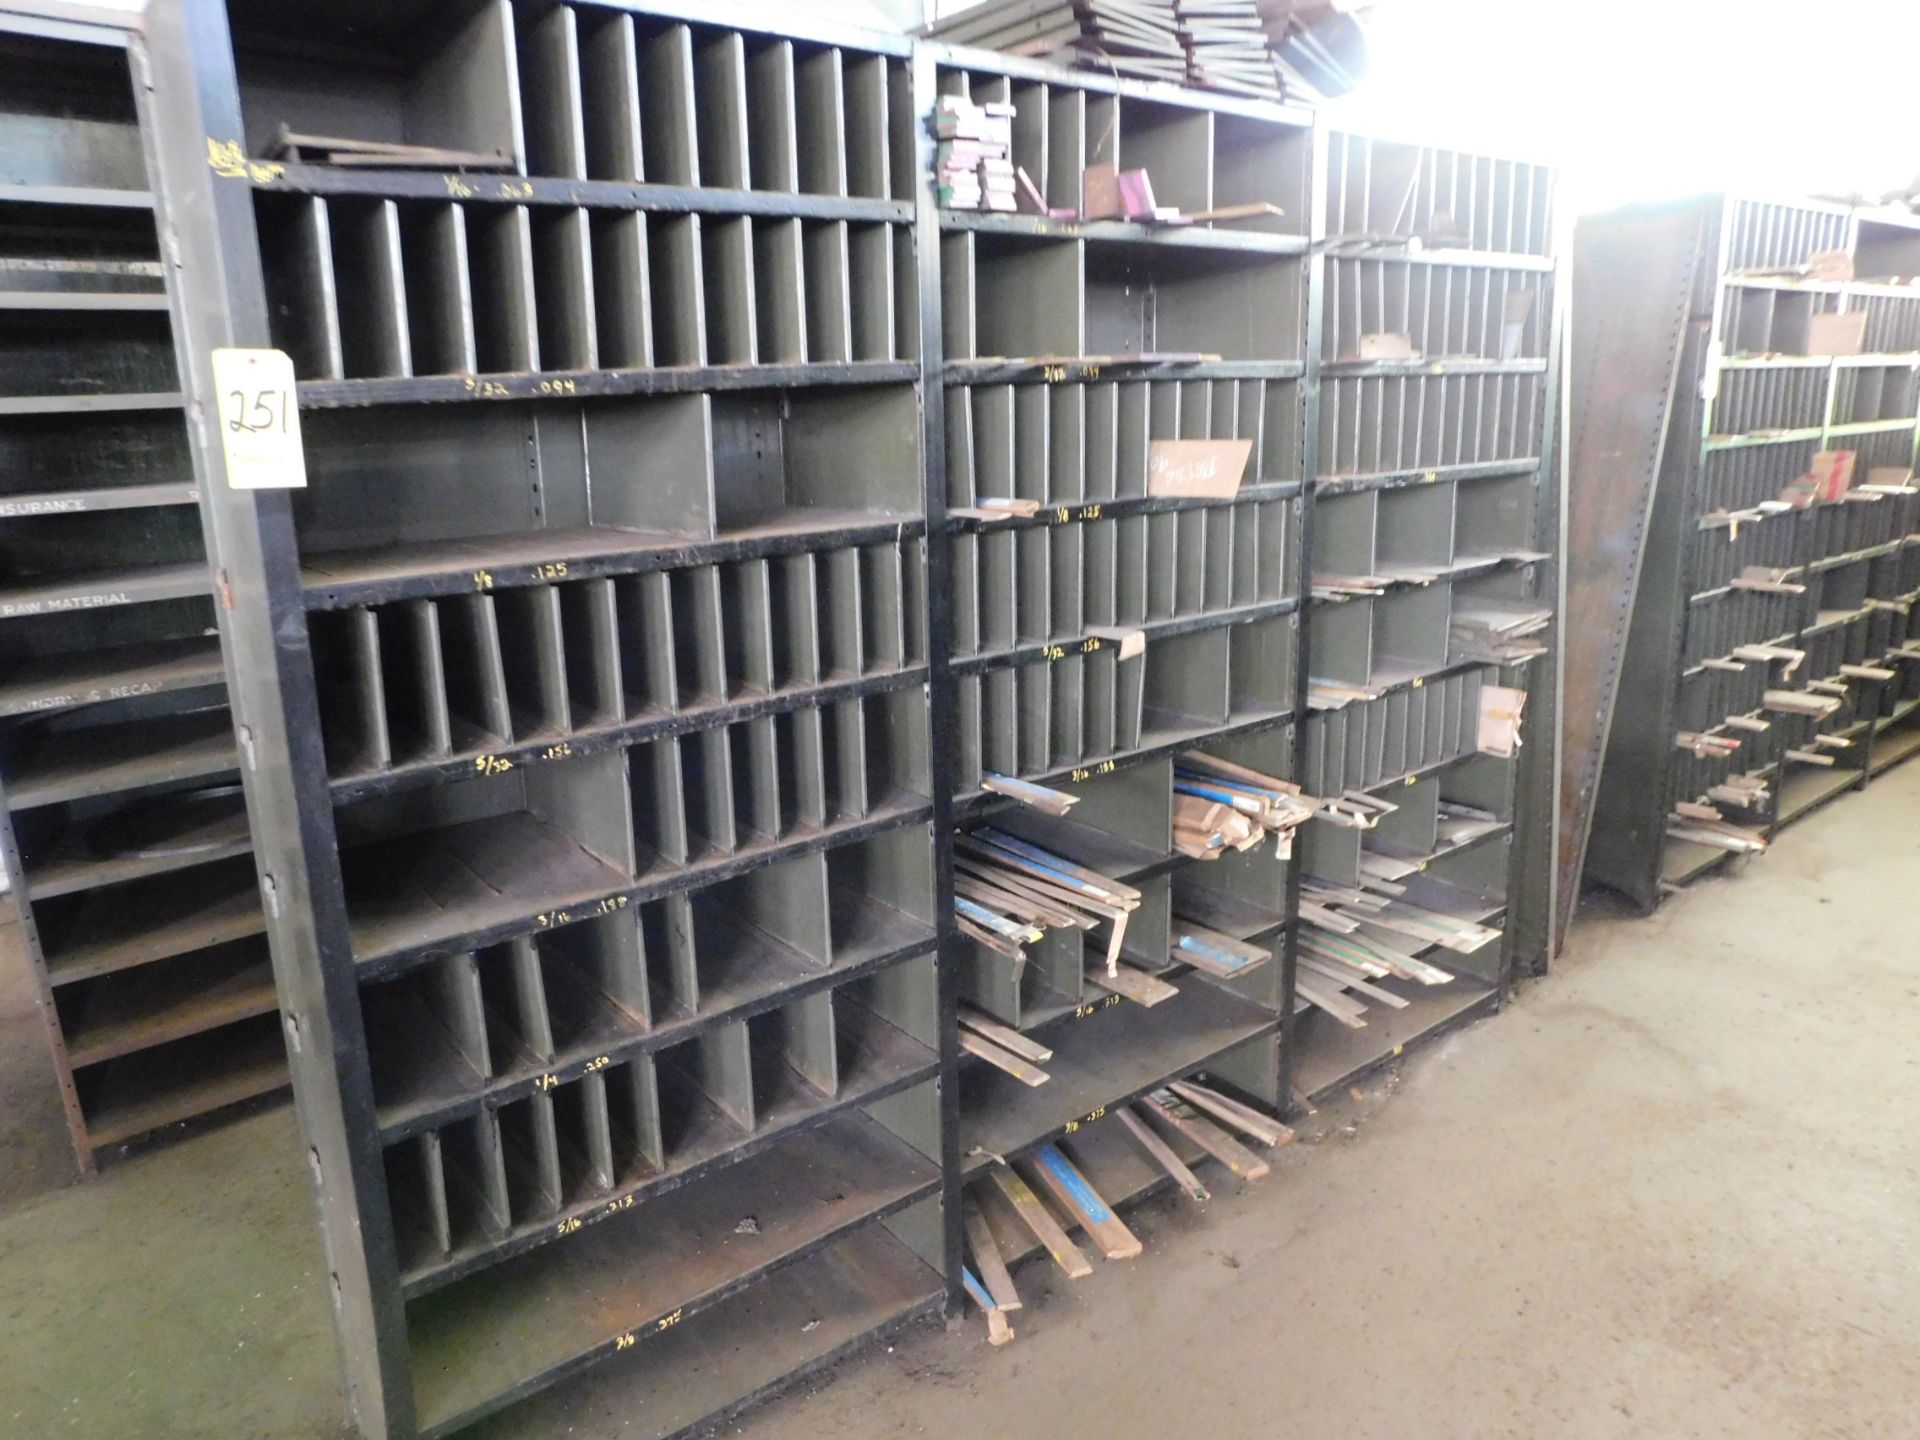 Contents of Precision Ground Stock on (2) Sections of Shelving